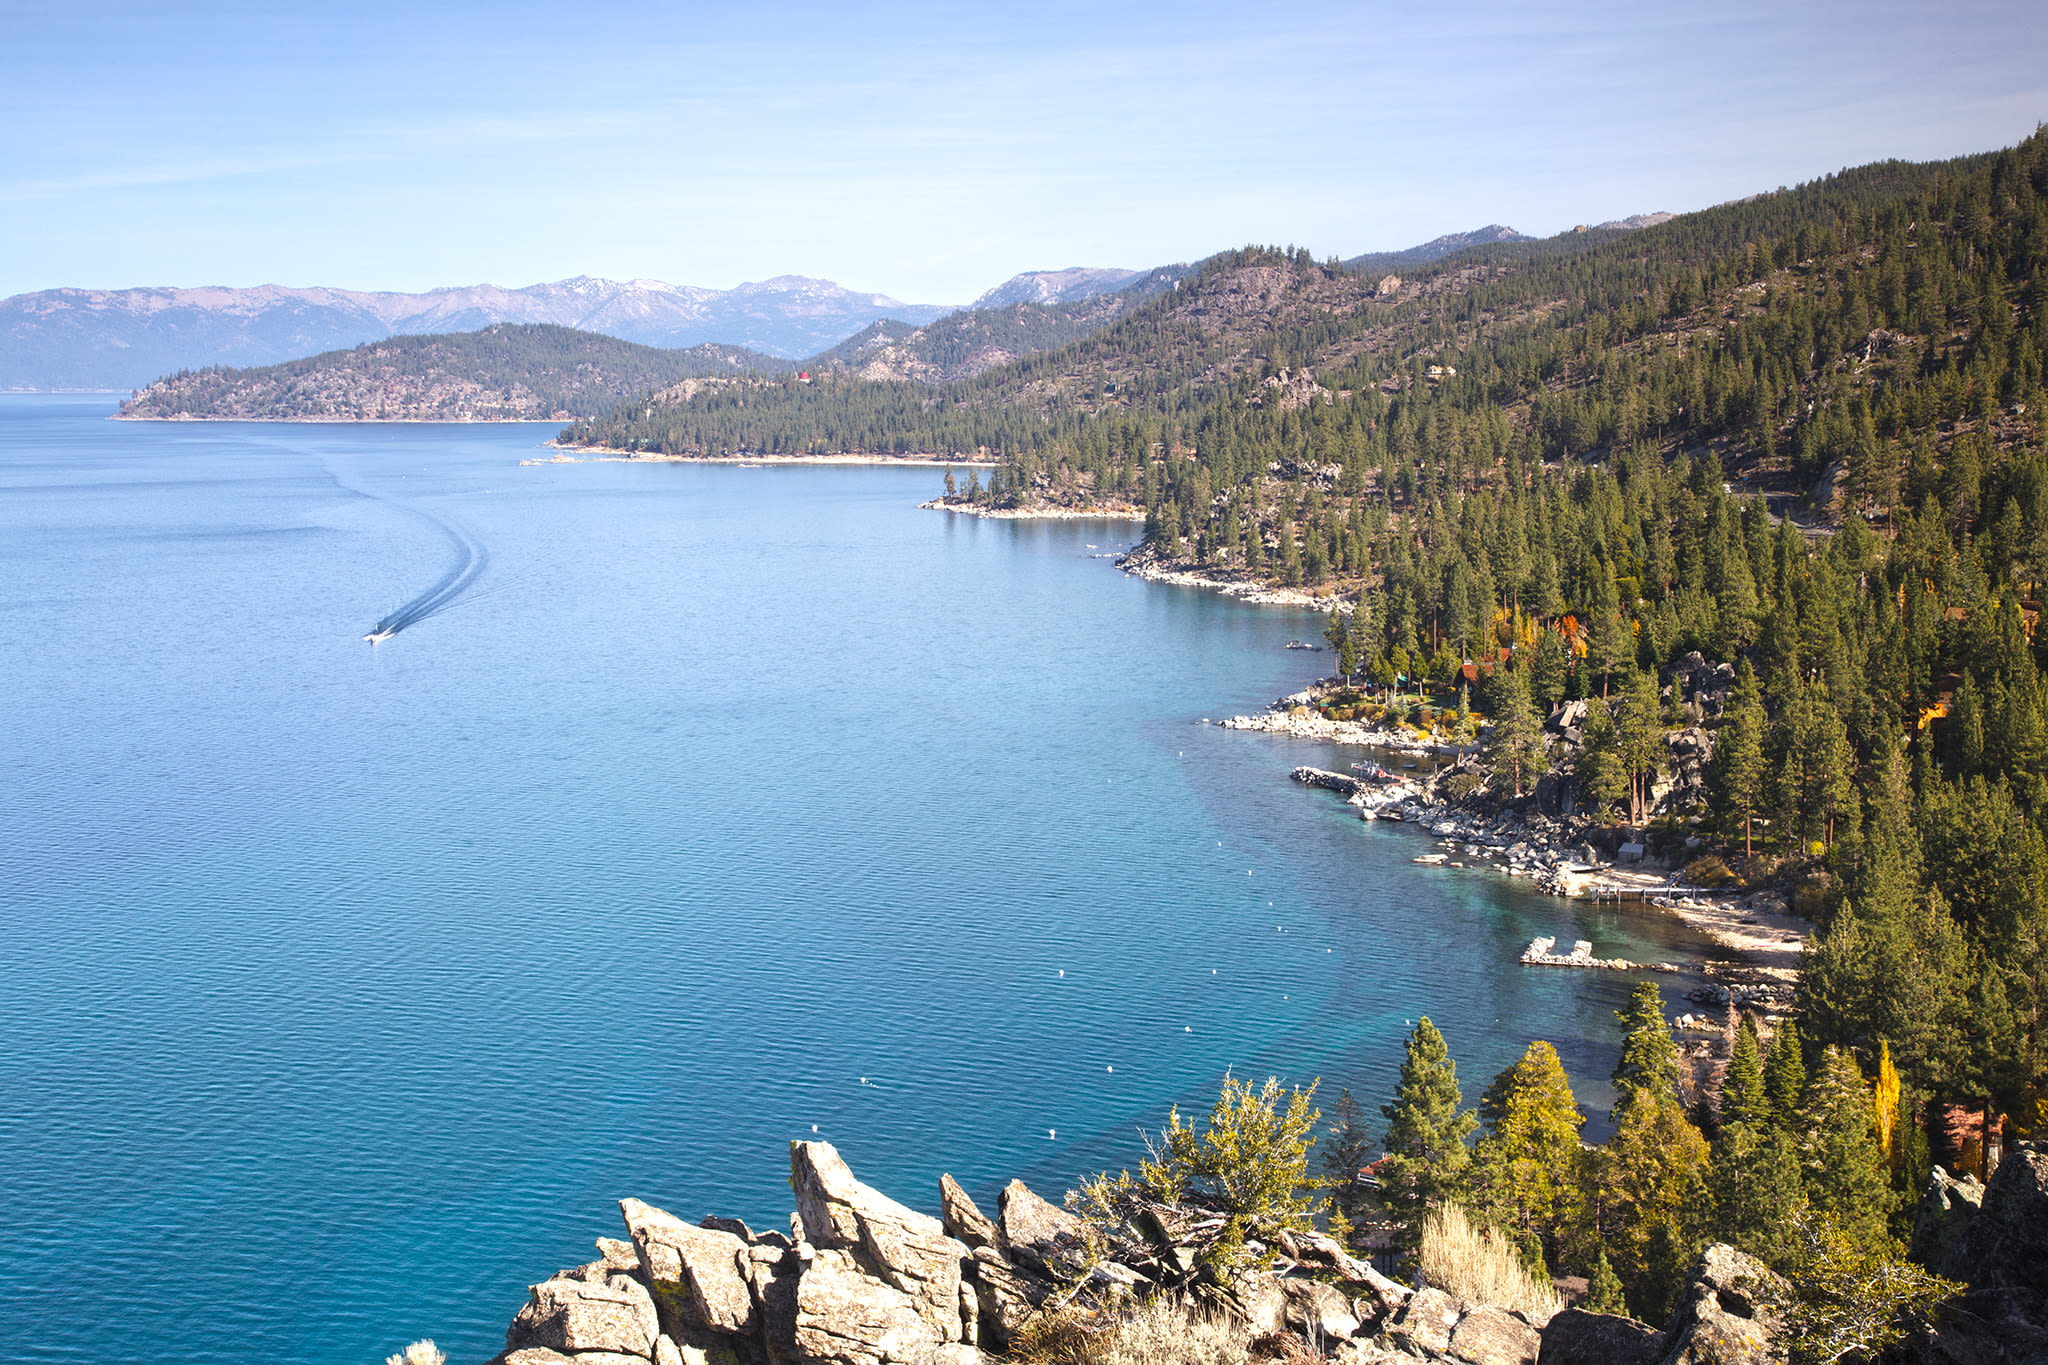 23-year-old college student drowns in Lake Tahoe